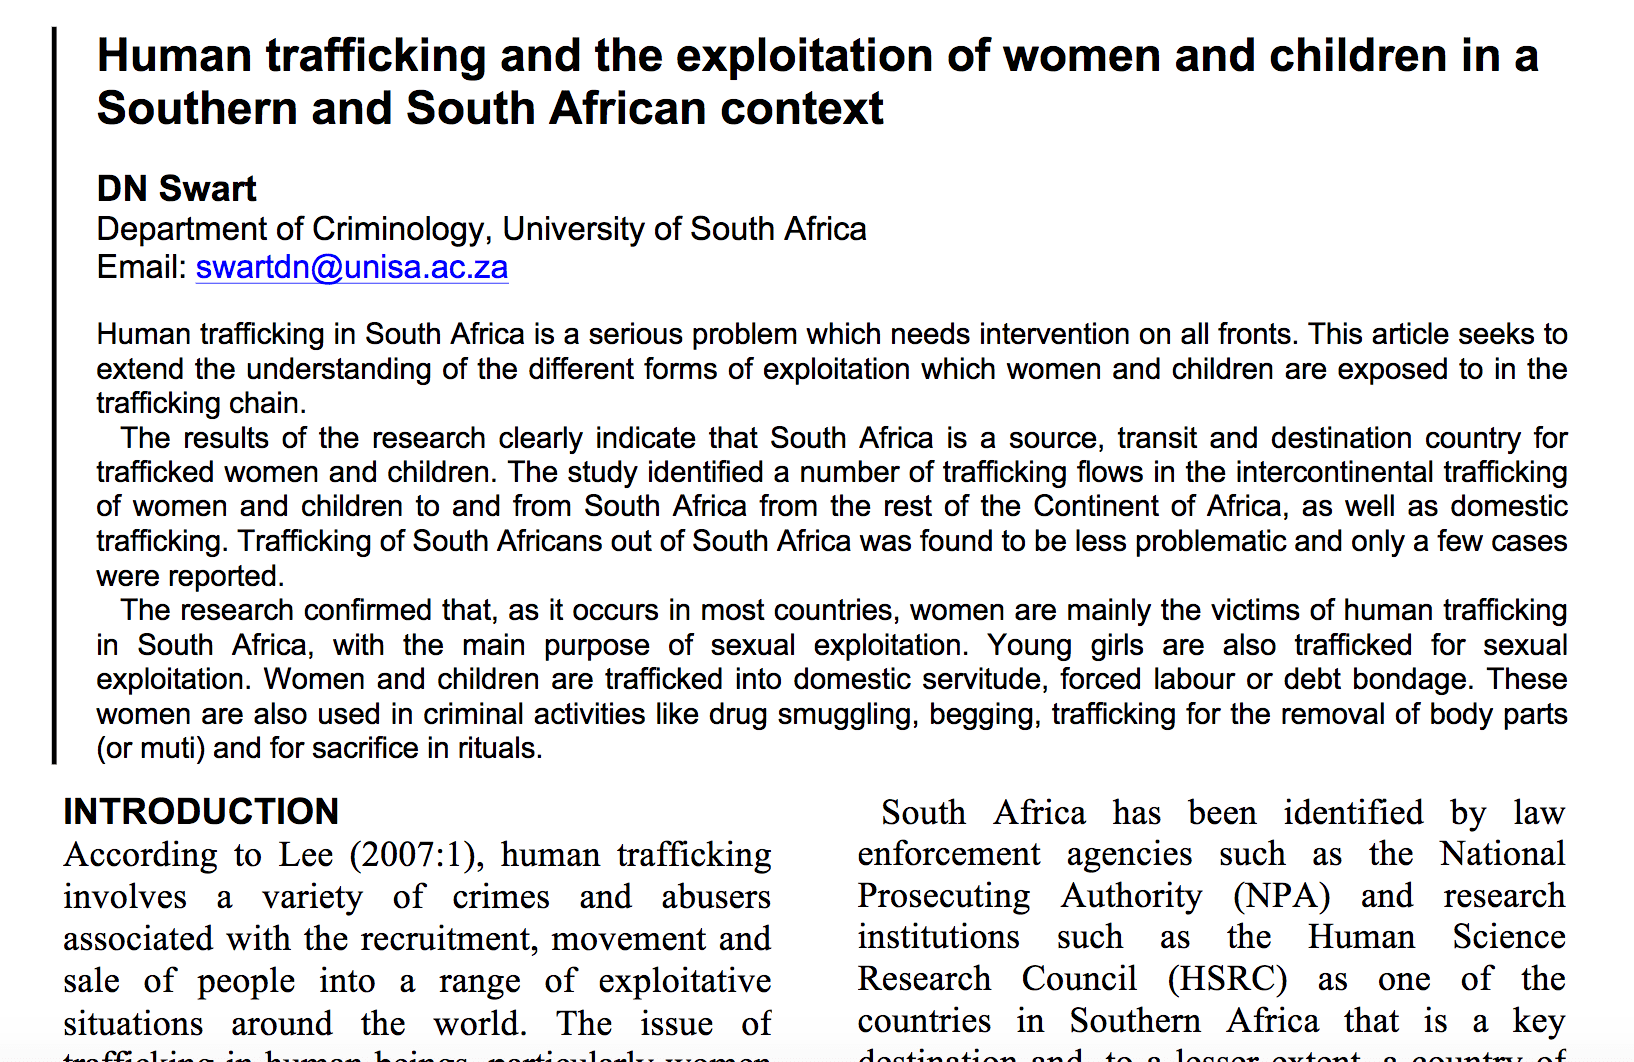 Human trafficking and the exploitation of women and children in a Southern and South African context